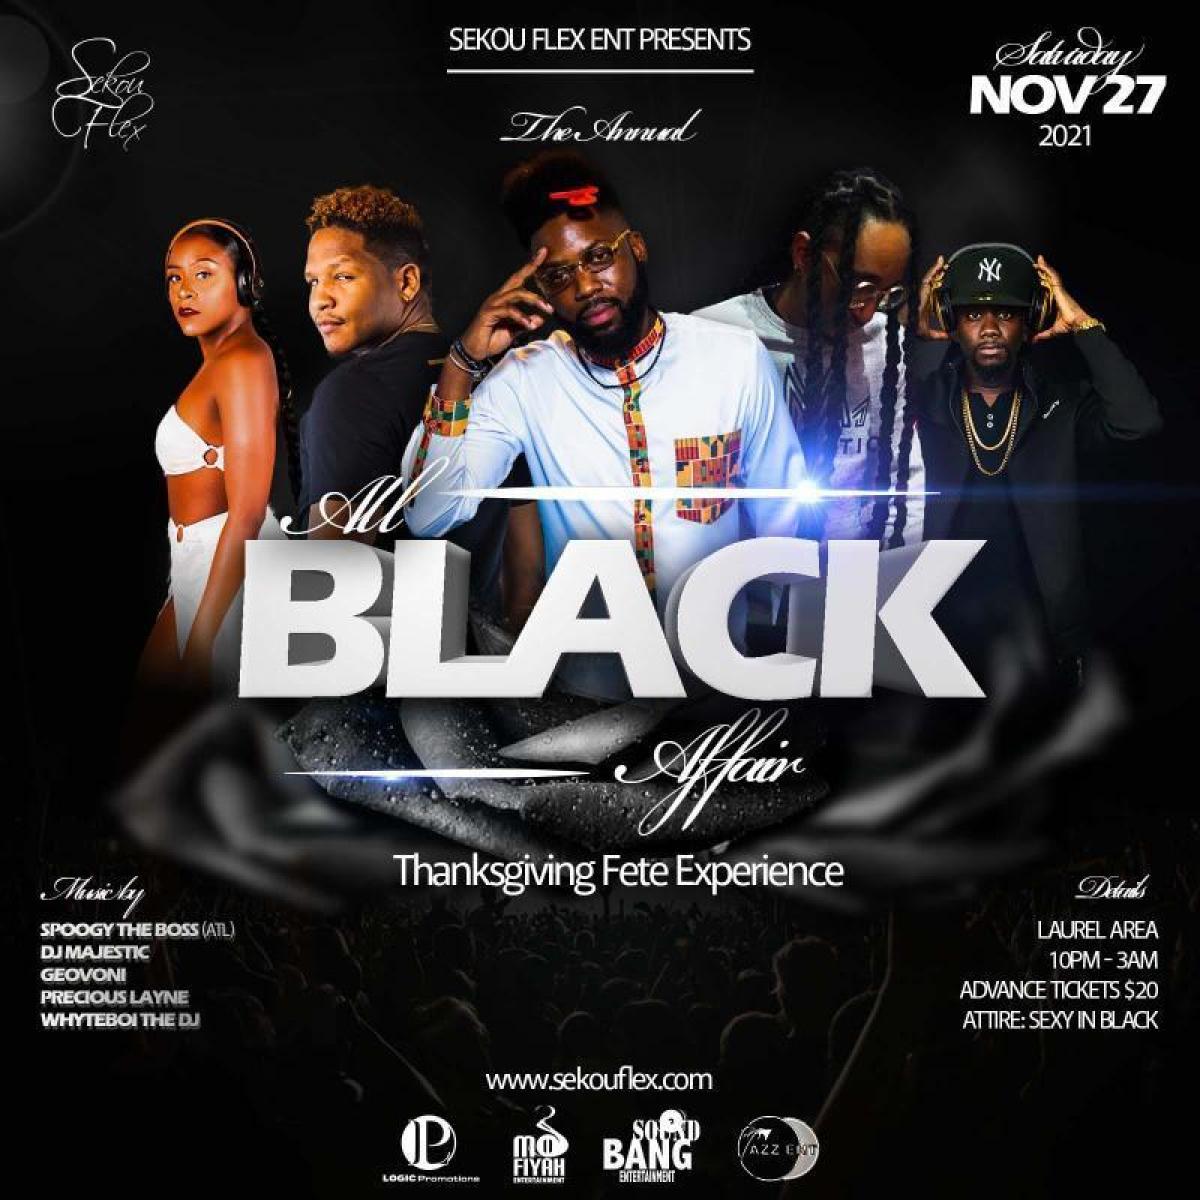 All Black Affair: Thanksgiving Fete Experience flyer or graphic.